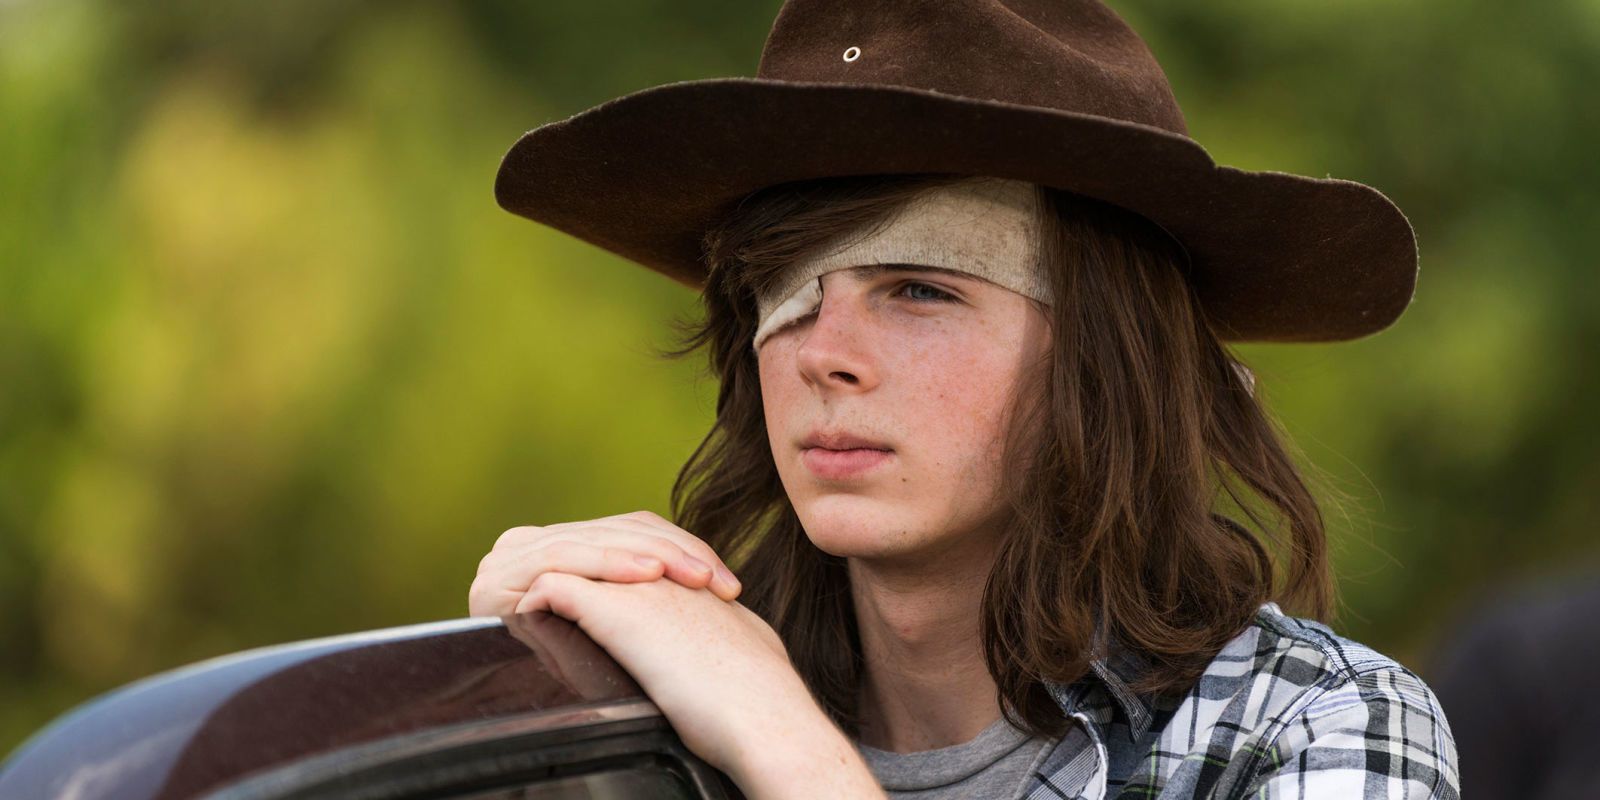 Carl Grimes leans on the door of a car while wearing an eyepatch and hat